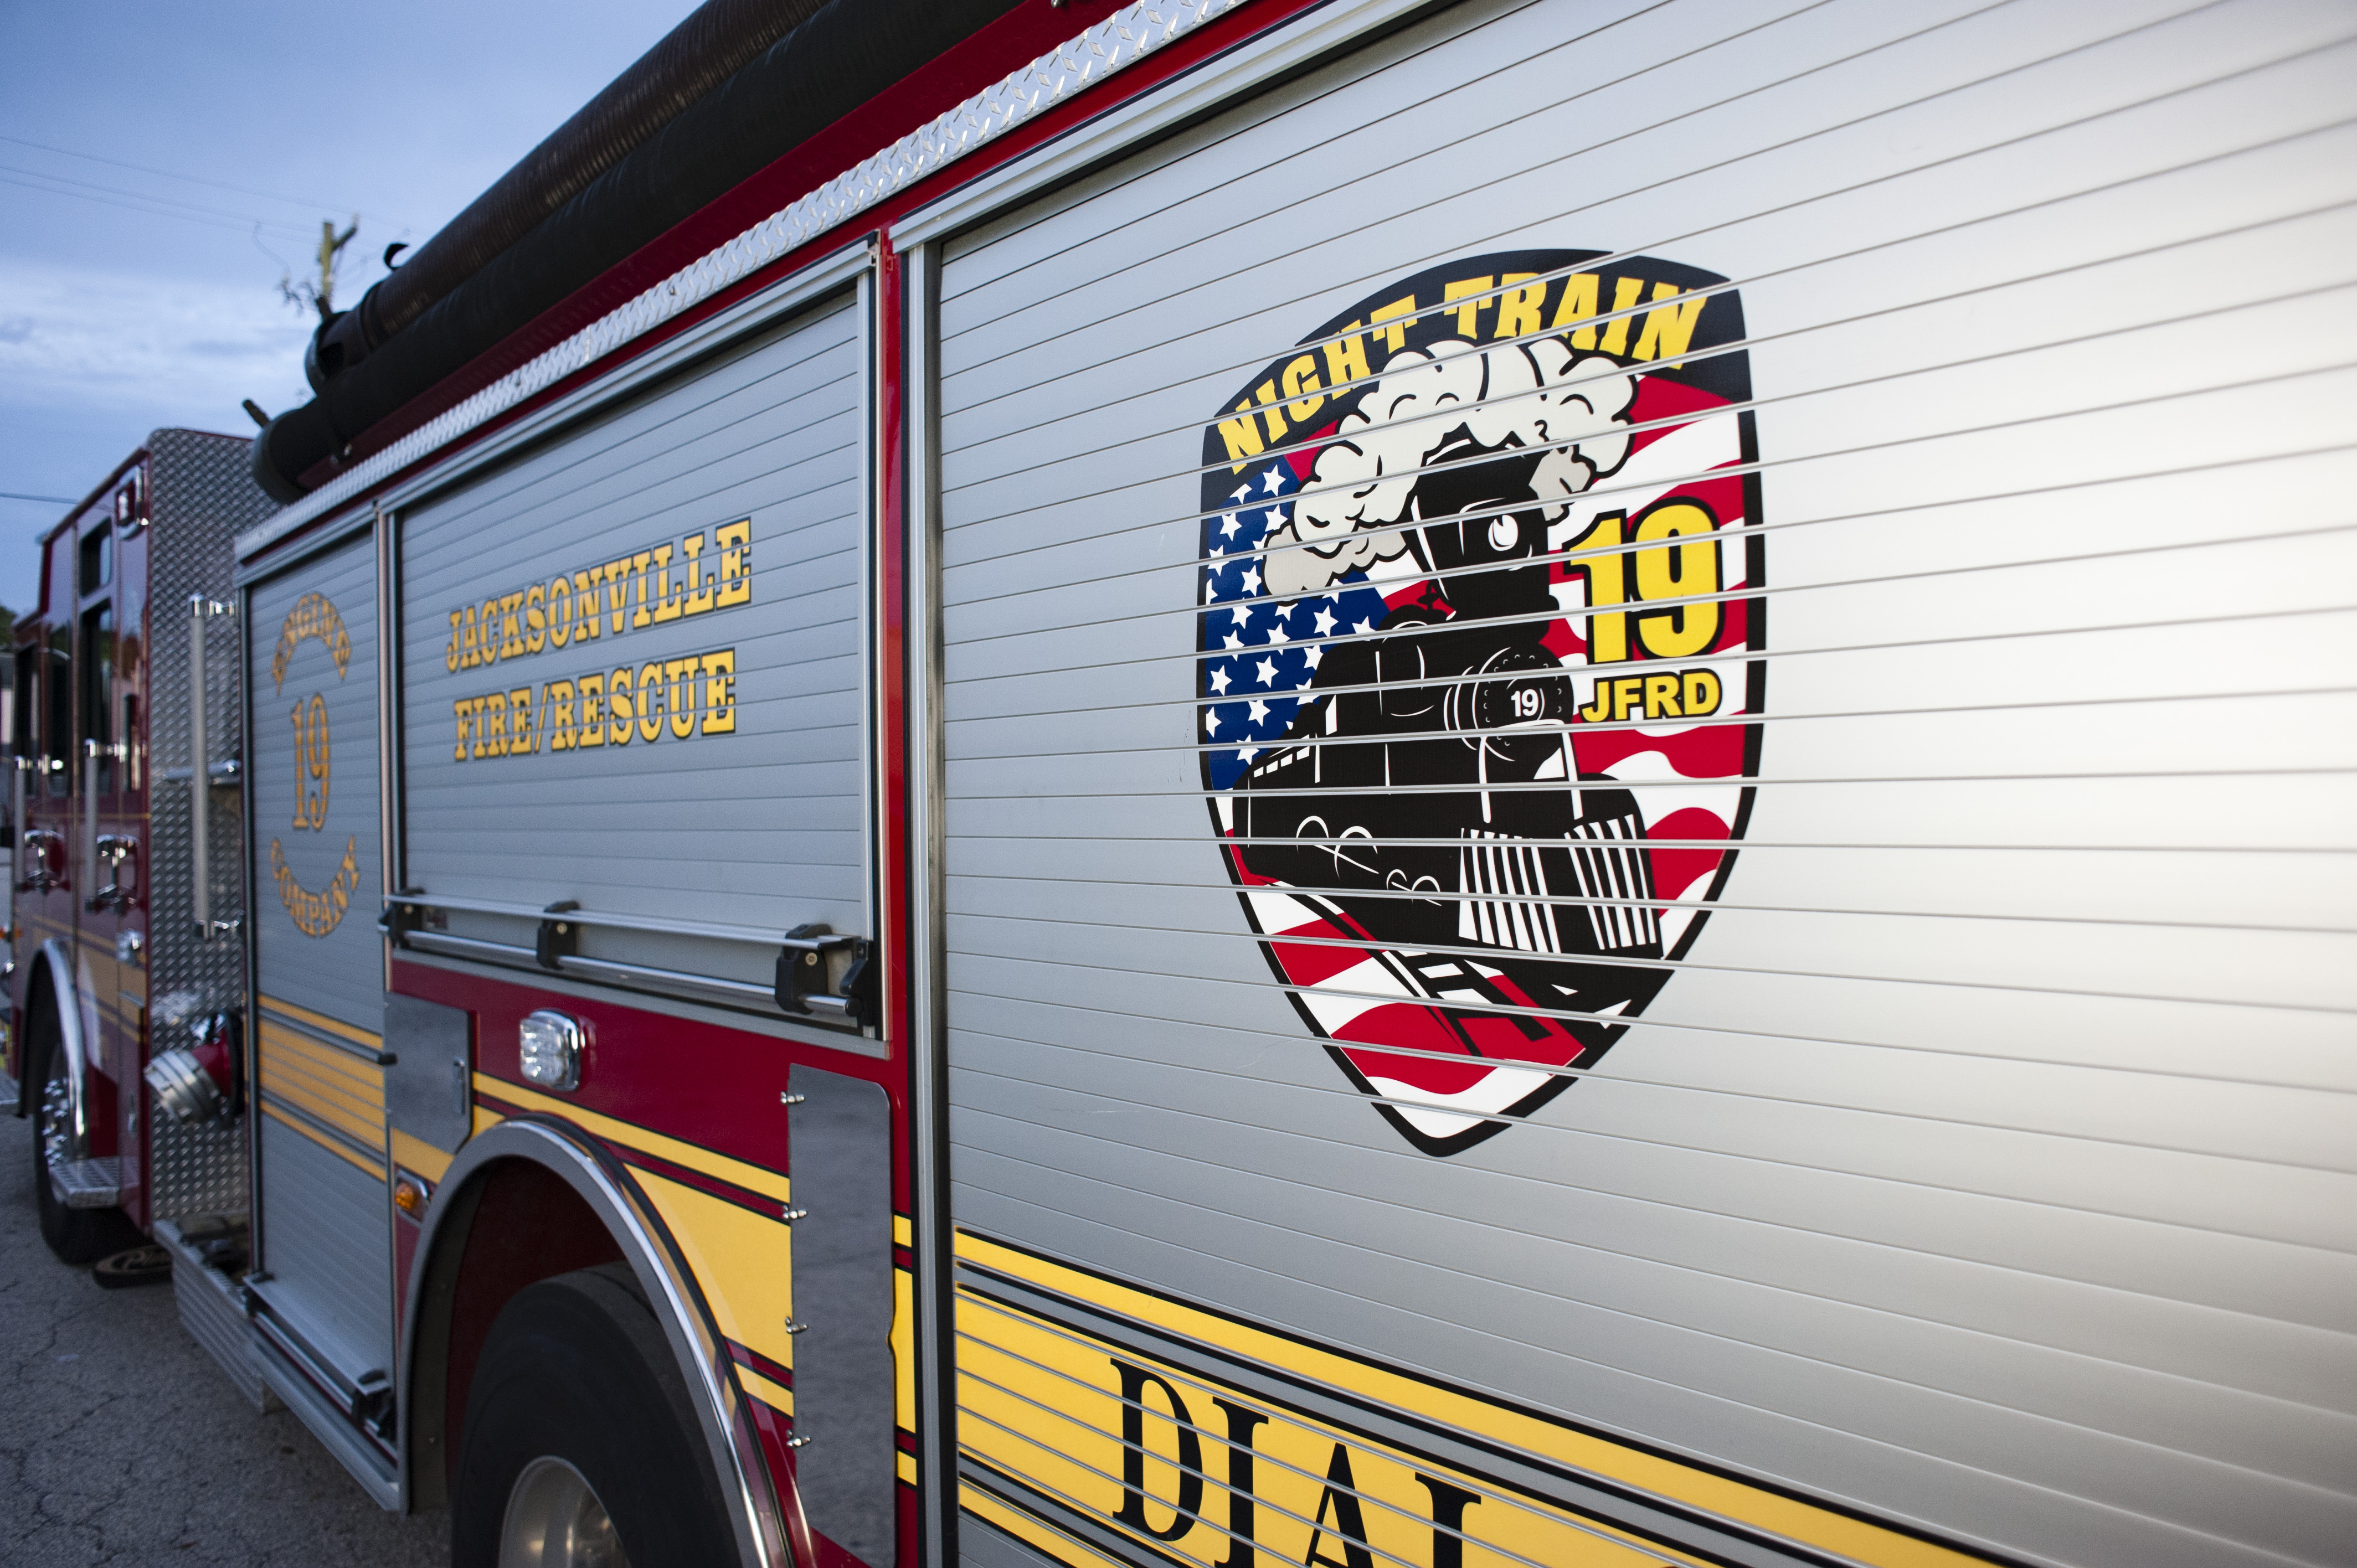 Jfrd Is 16th Busiest Department In The, Duval County Fire Pit Regulations